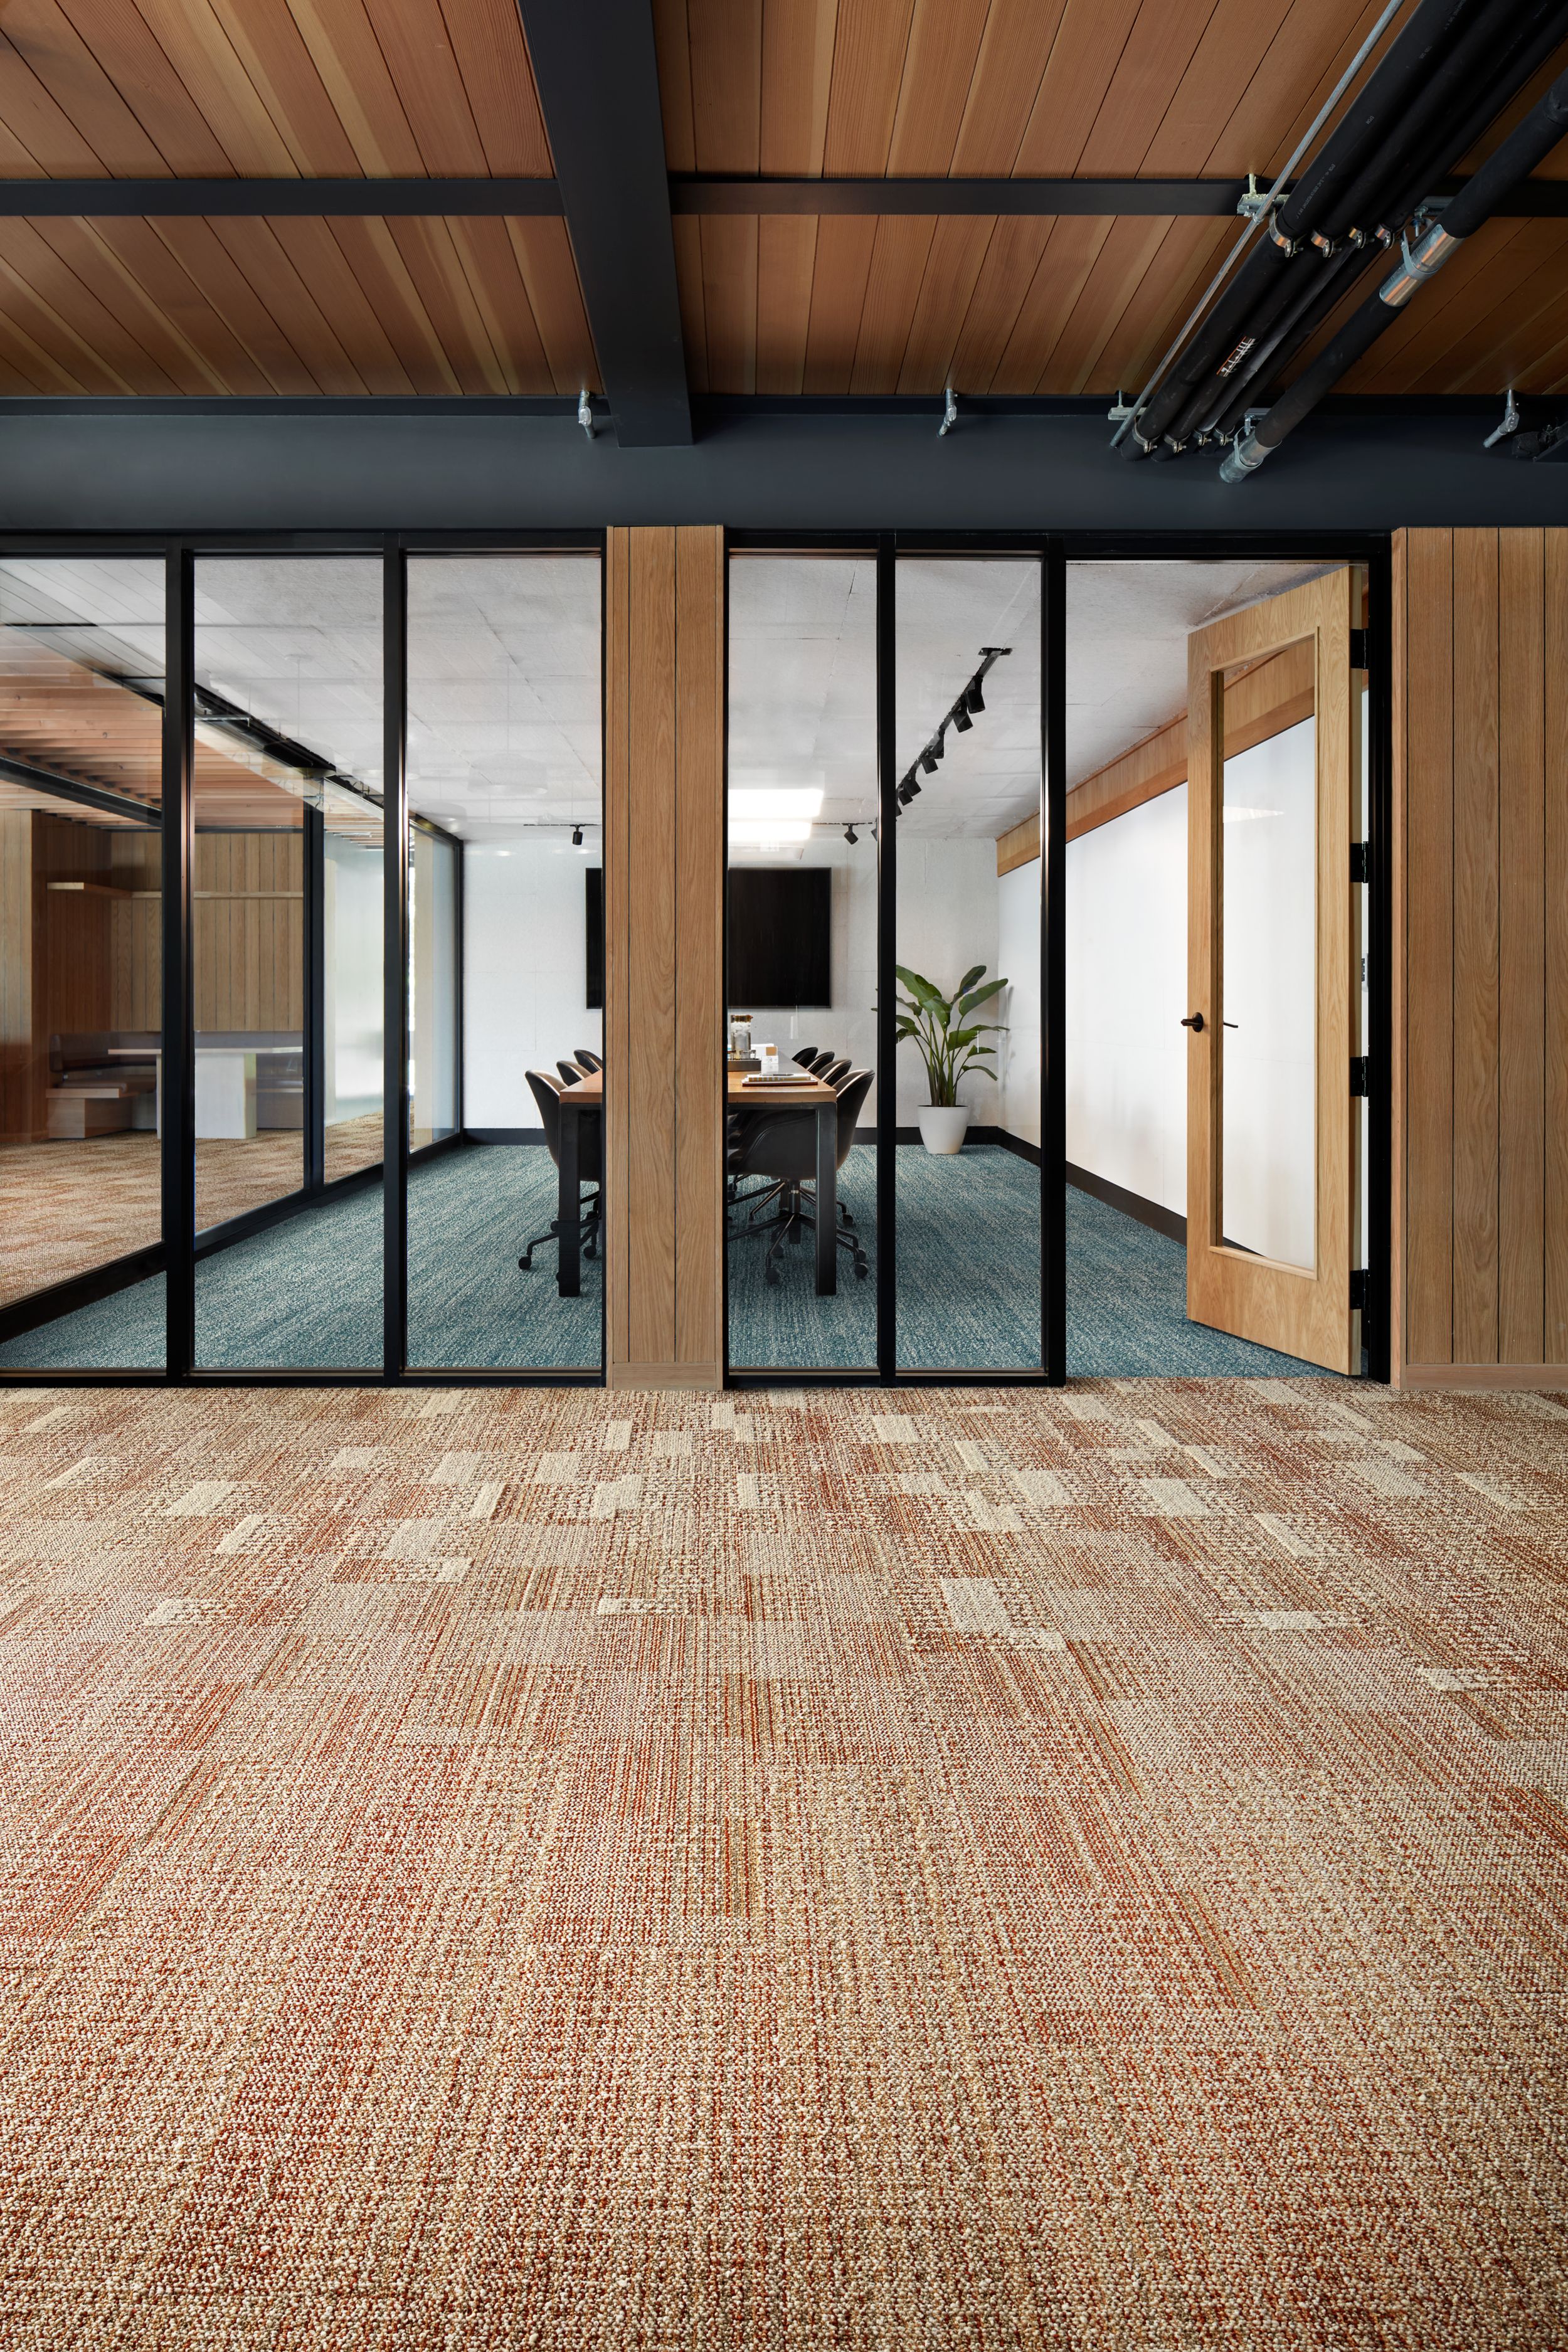 Interface Dot 2 Dot, Dot O-Mine and Diddley Dot plank carpet tile in meeting room image number 9